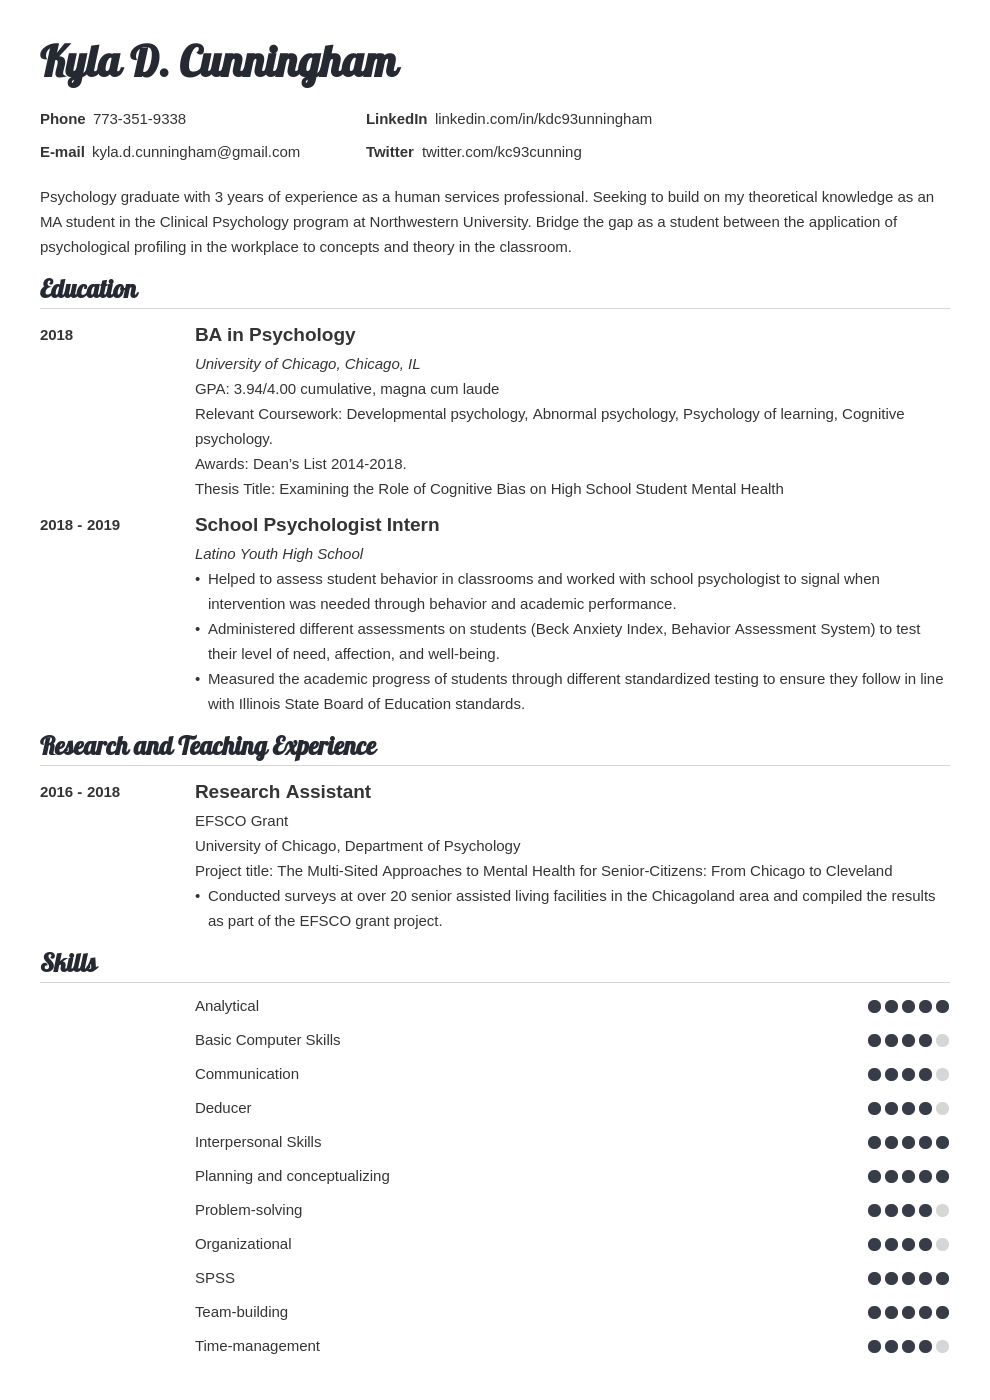 Resume for Graduate School Application (Examples, Template, CV)